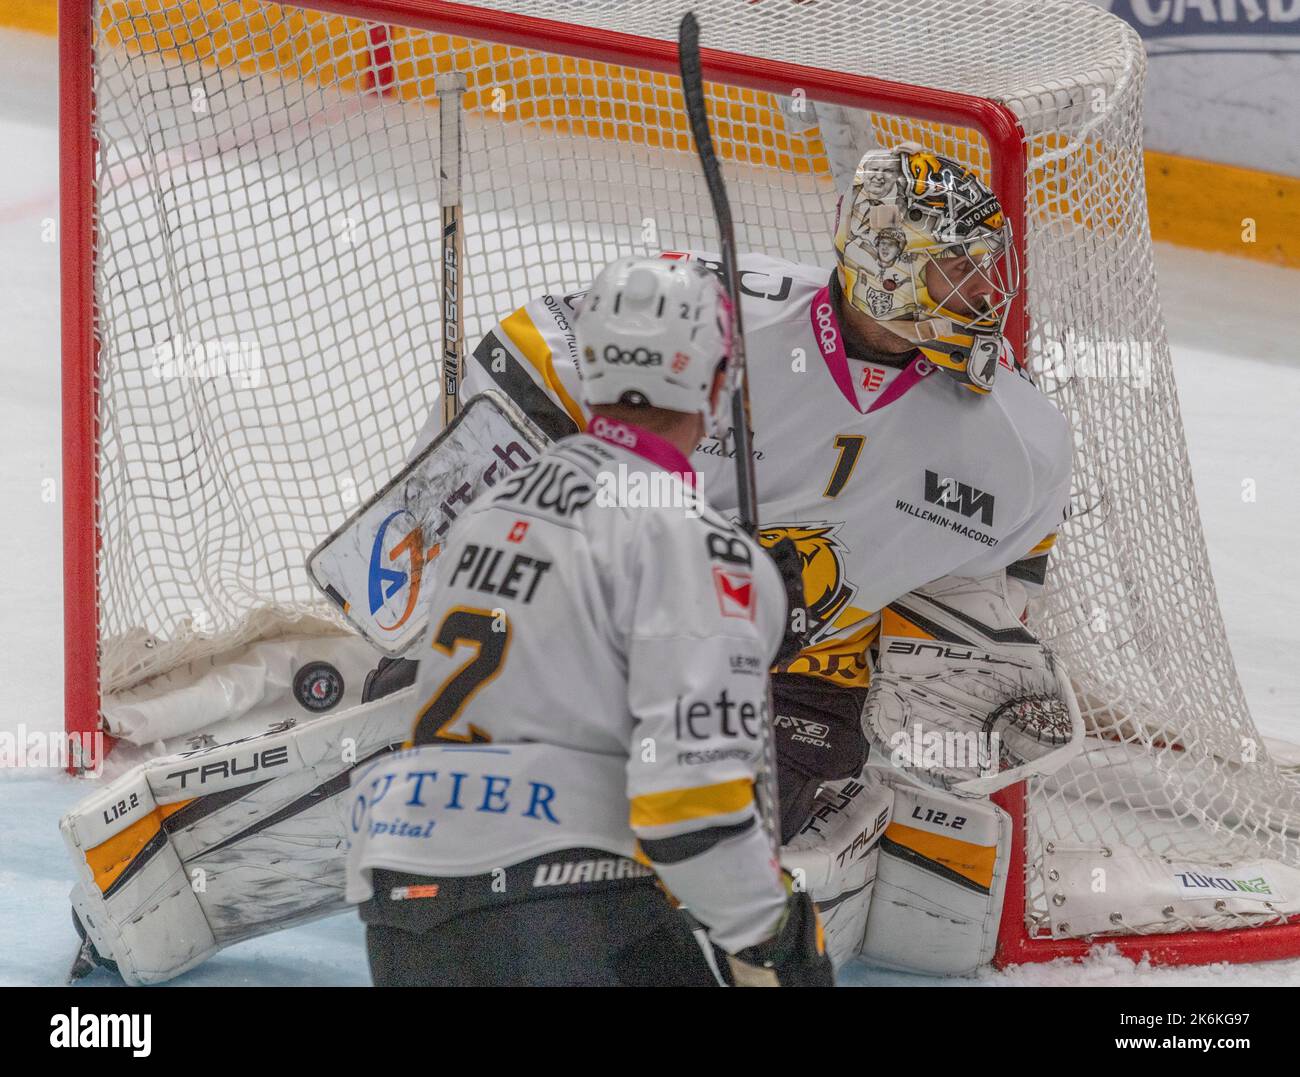 Lausanne Switzerland, 10/14/2022: Tim Wolf (goalie) of HC Ajoie (1) concedes a goal during 11th day of the 2022-2023 Swiss National League Season of the 2022-2023 Swiss National League Season with the Lausanne HC and HC Ajoie. The match took place at the Vaudoise Arena in Lausanne. Credit: Eric Dubost/Alamy Live News Stock Photo